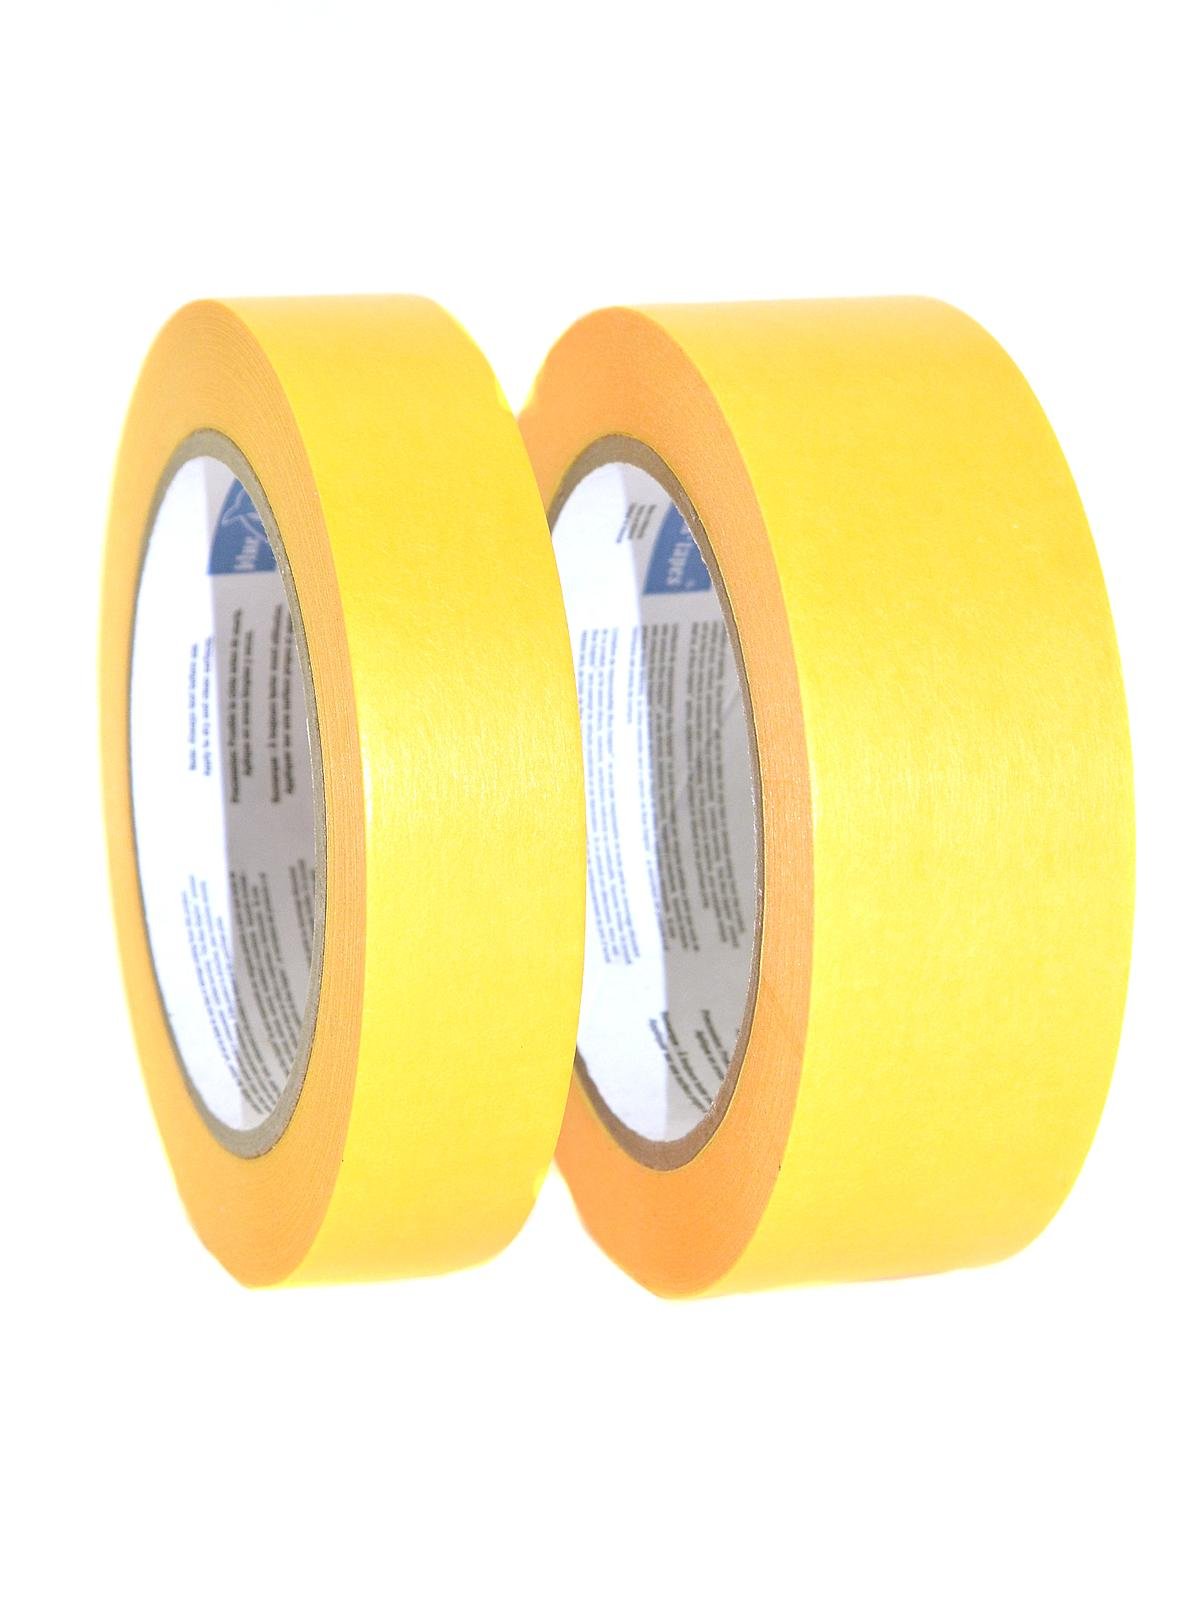 Blue Dolphin Tapes - Washi Gold Tape